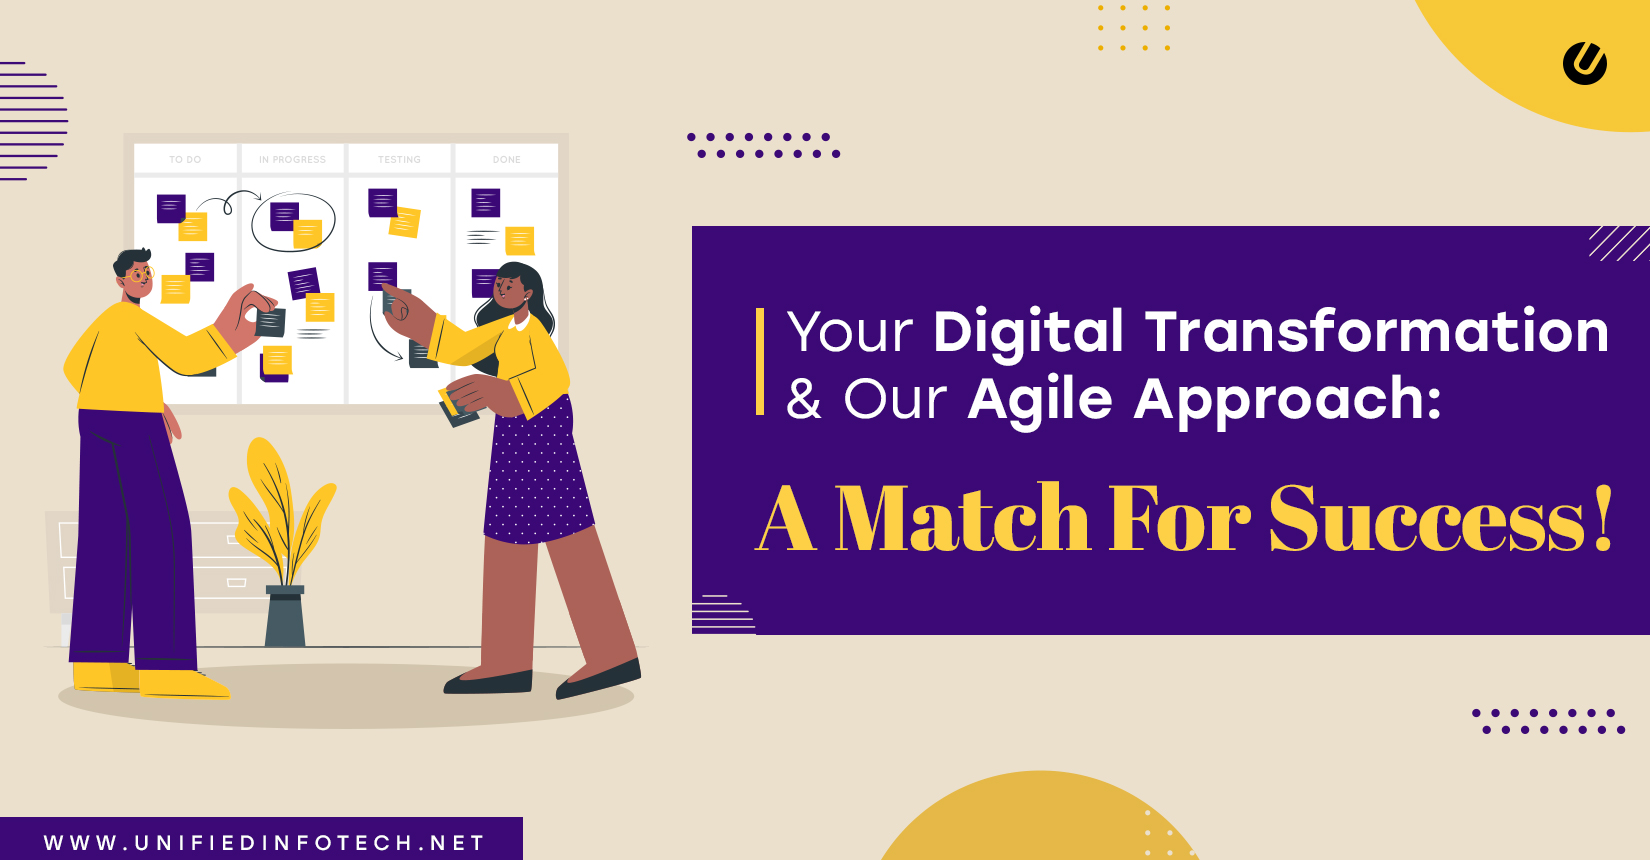 How We Use Them For Digital Transformation Consulting